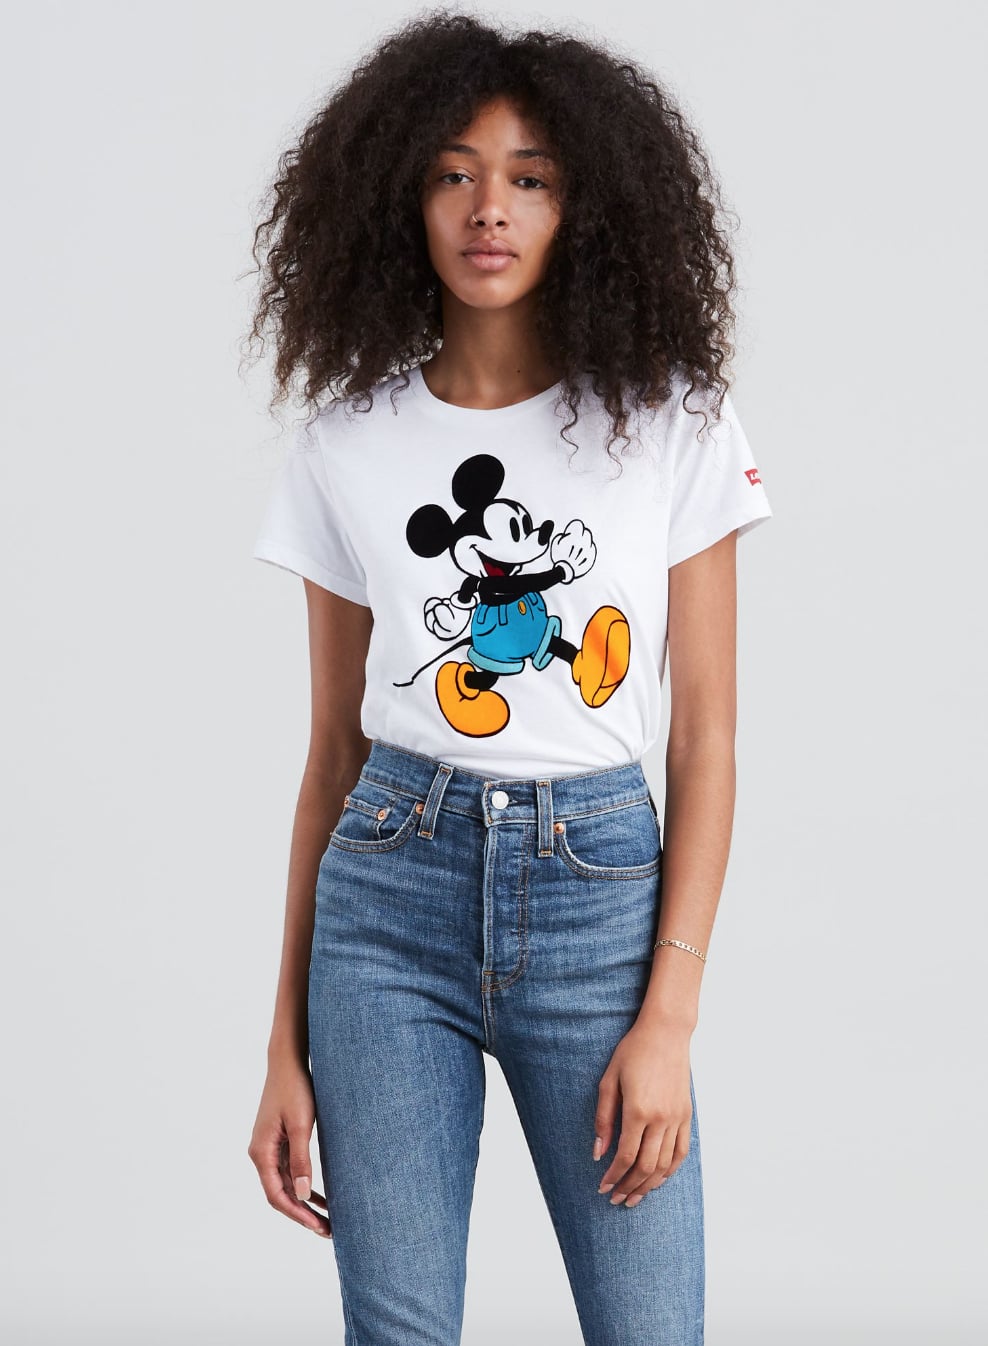 mickey levis jeans